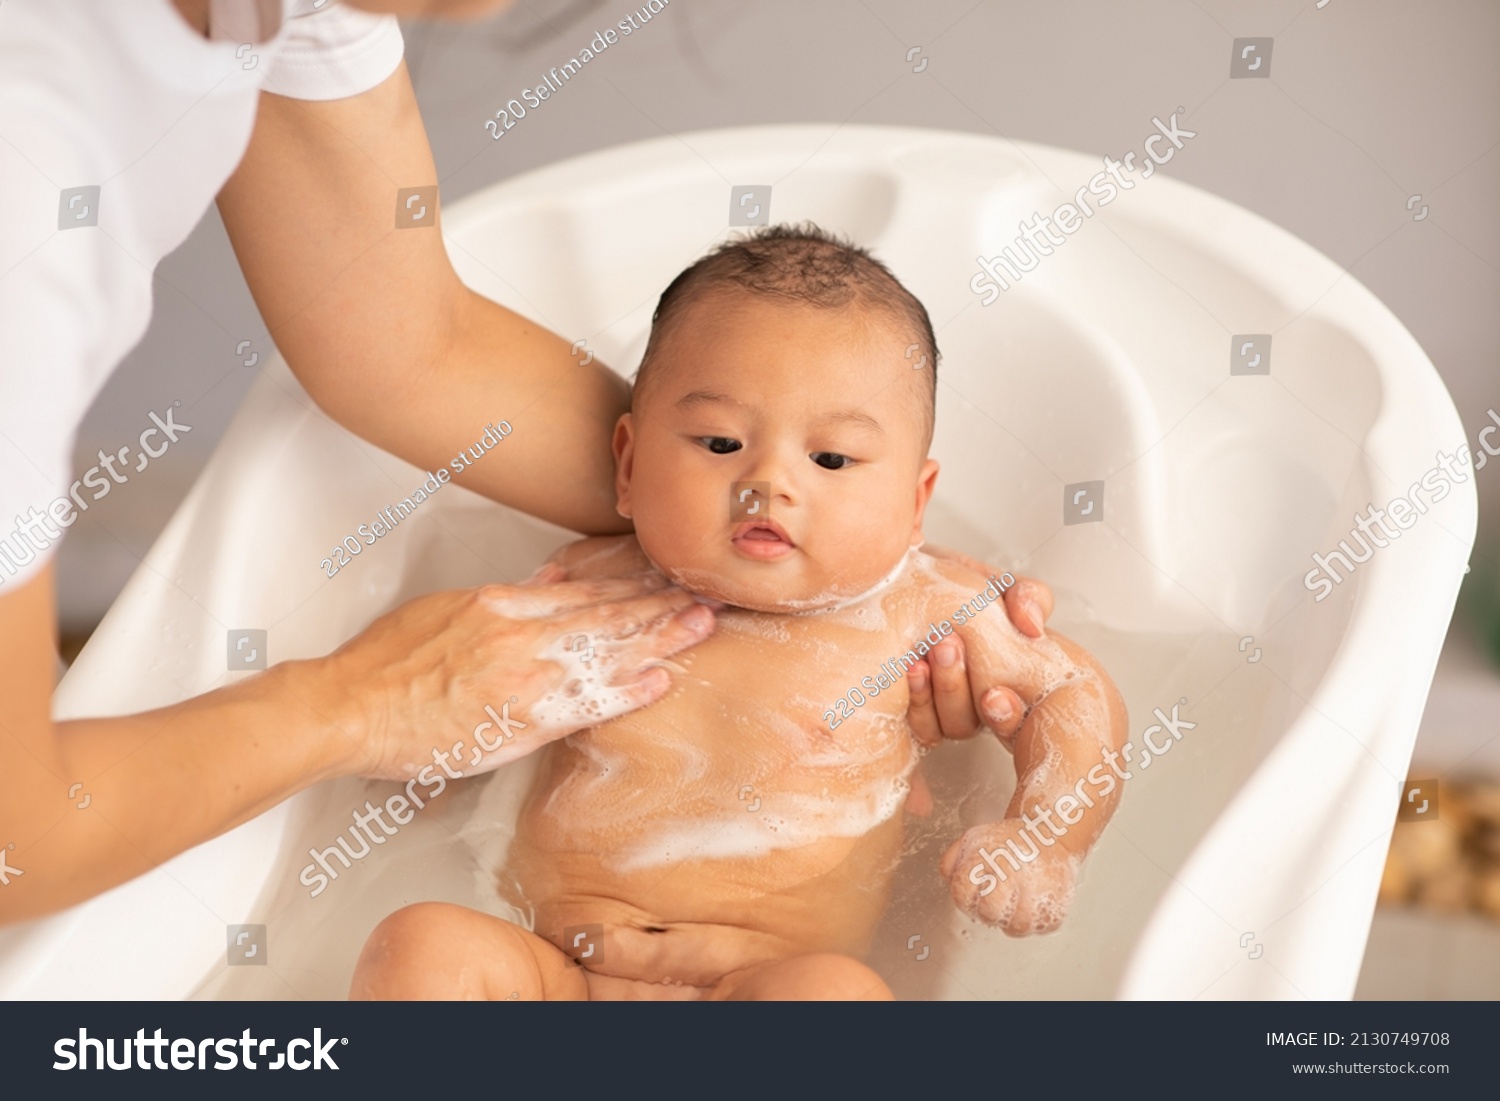 Adorable of asian newborn baby bathing in bathtub.mother bathing her son in warm water.Happy adorable newborn infant smile in tub relax and comfortable.Newborn baby care concept #2130749708